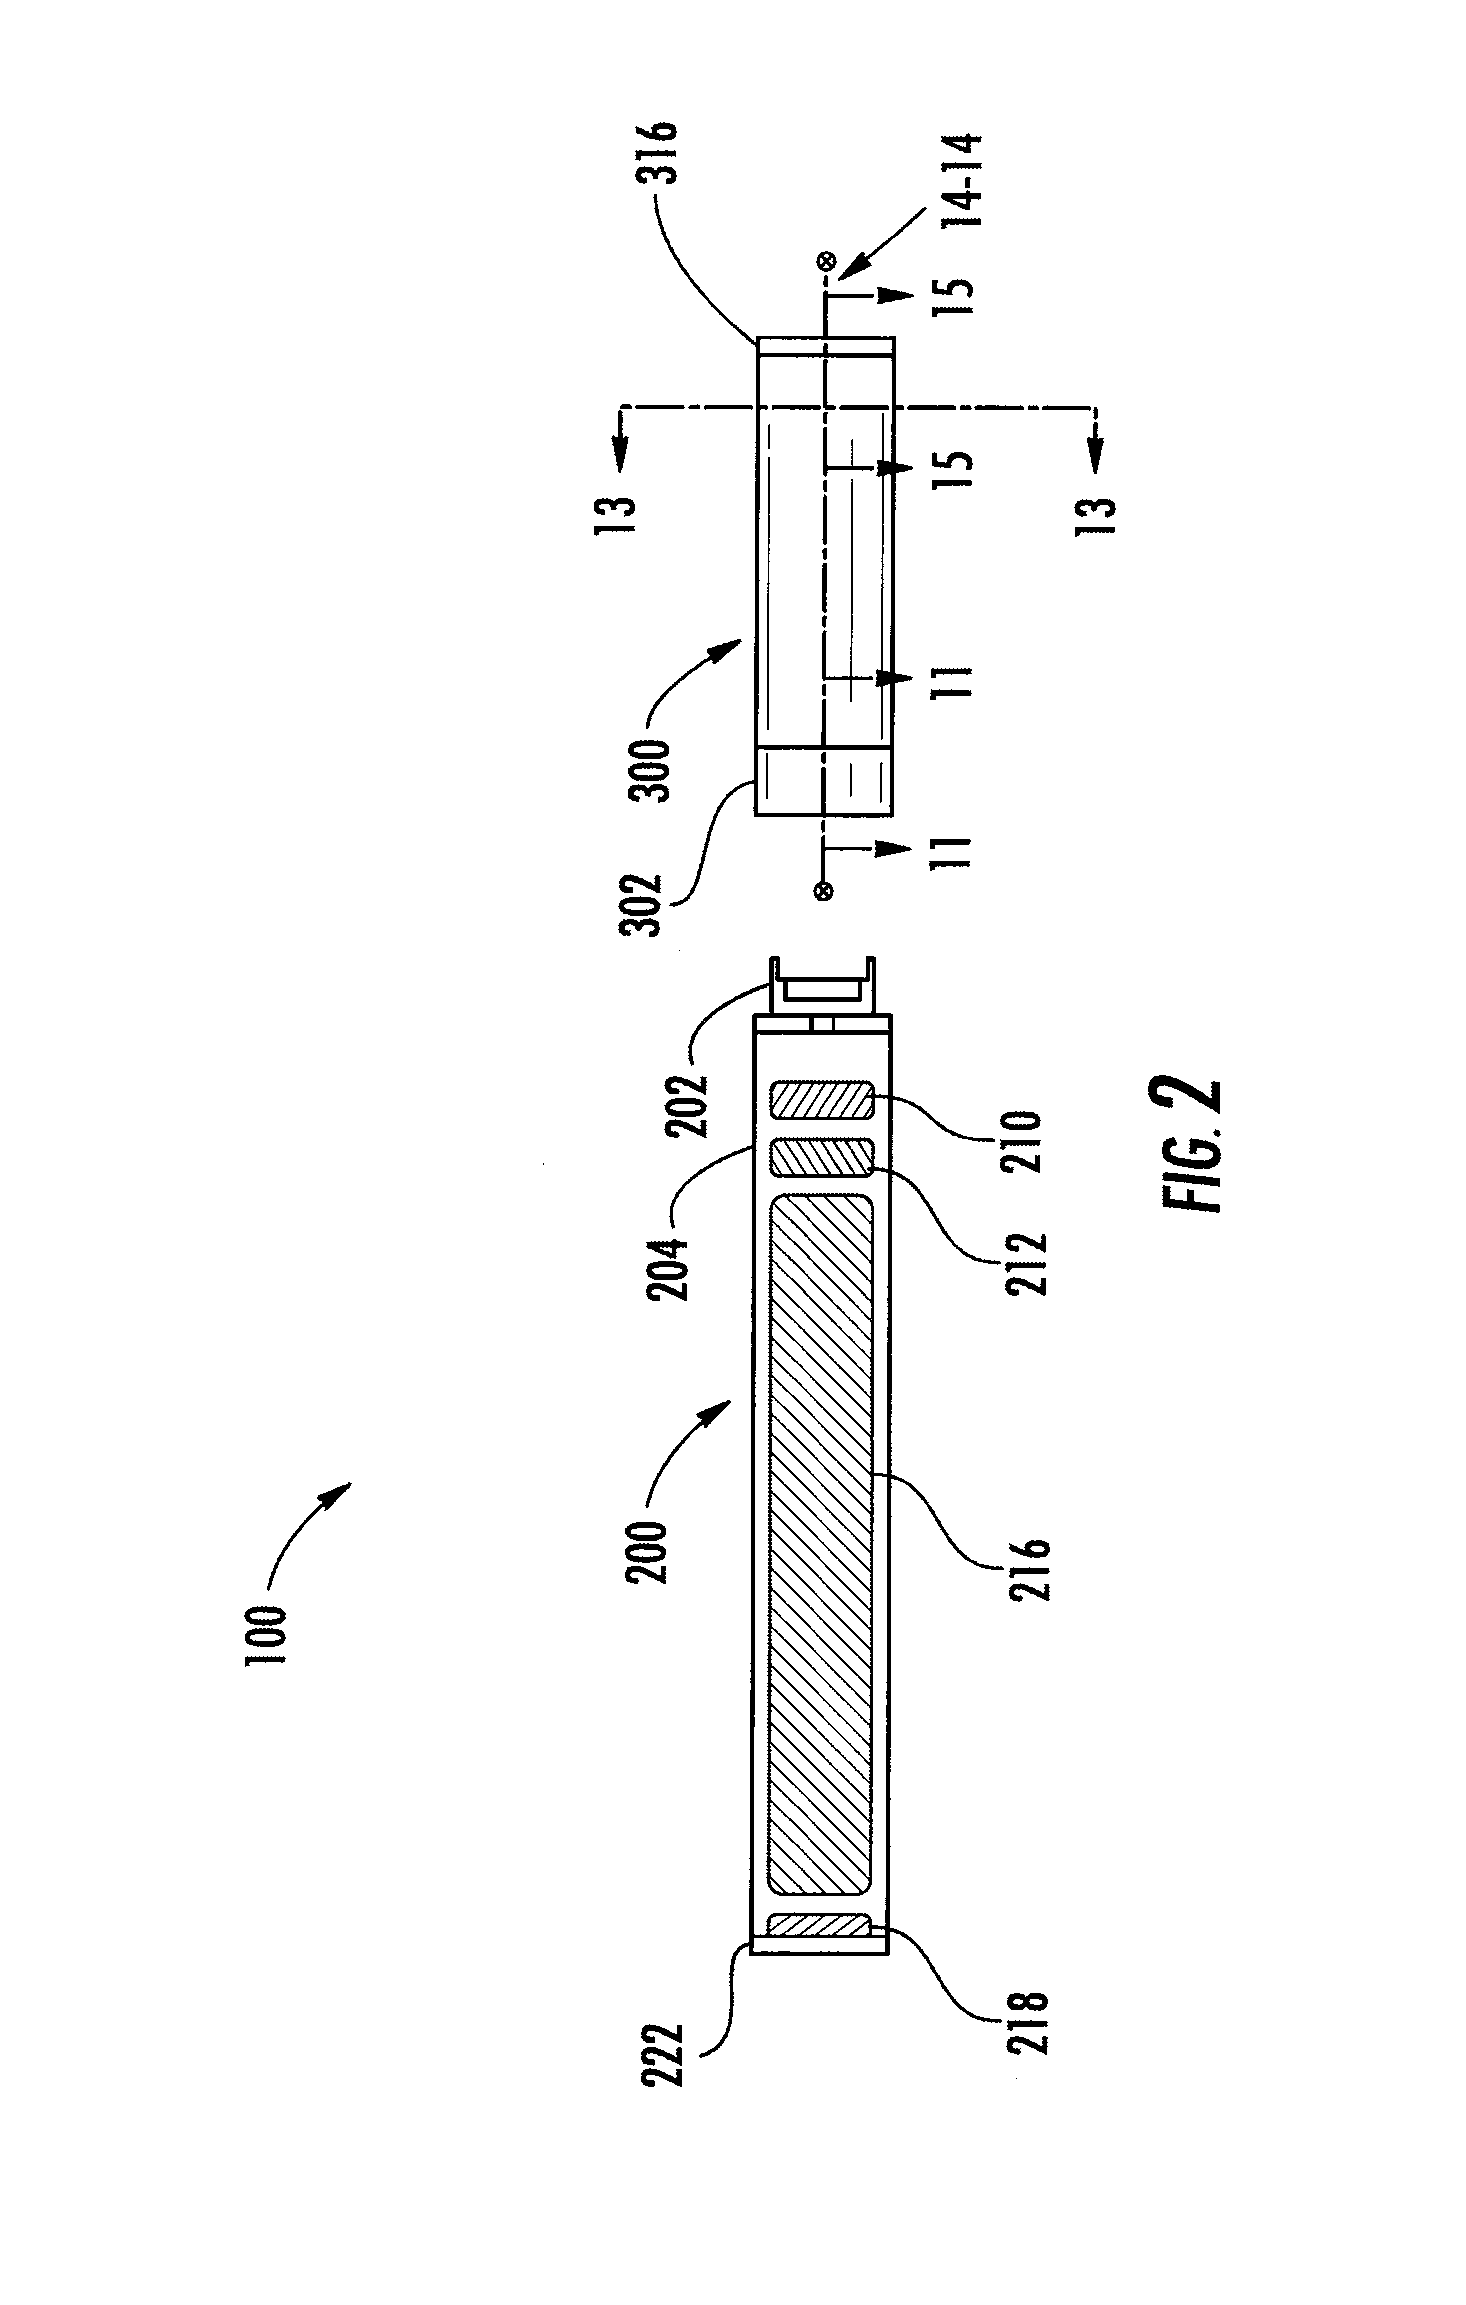 Sealed Cartridge for an Aerosol Delivery Device and Related Assembly Method